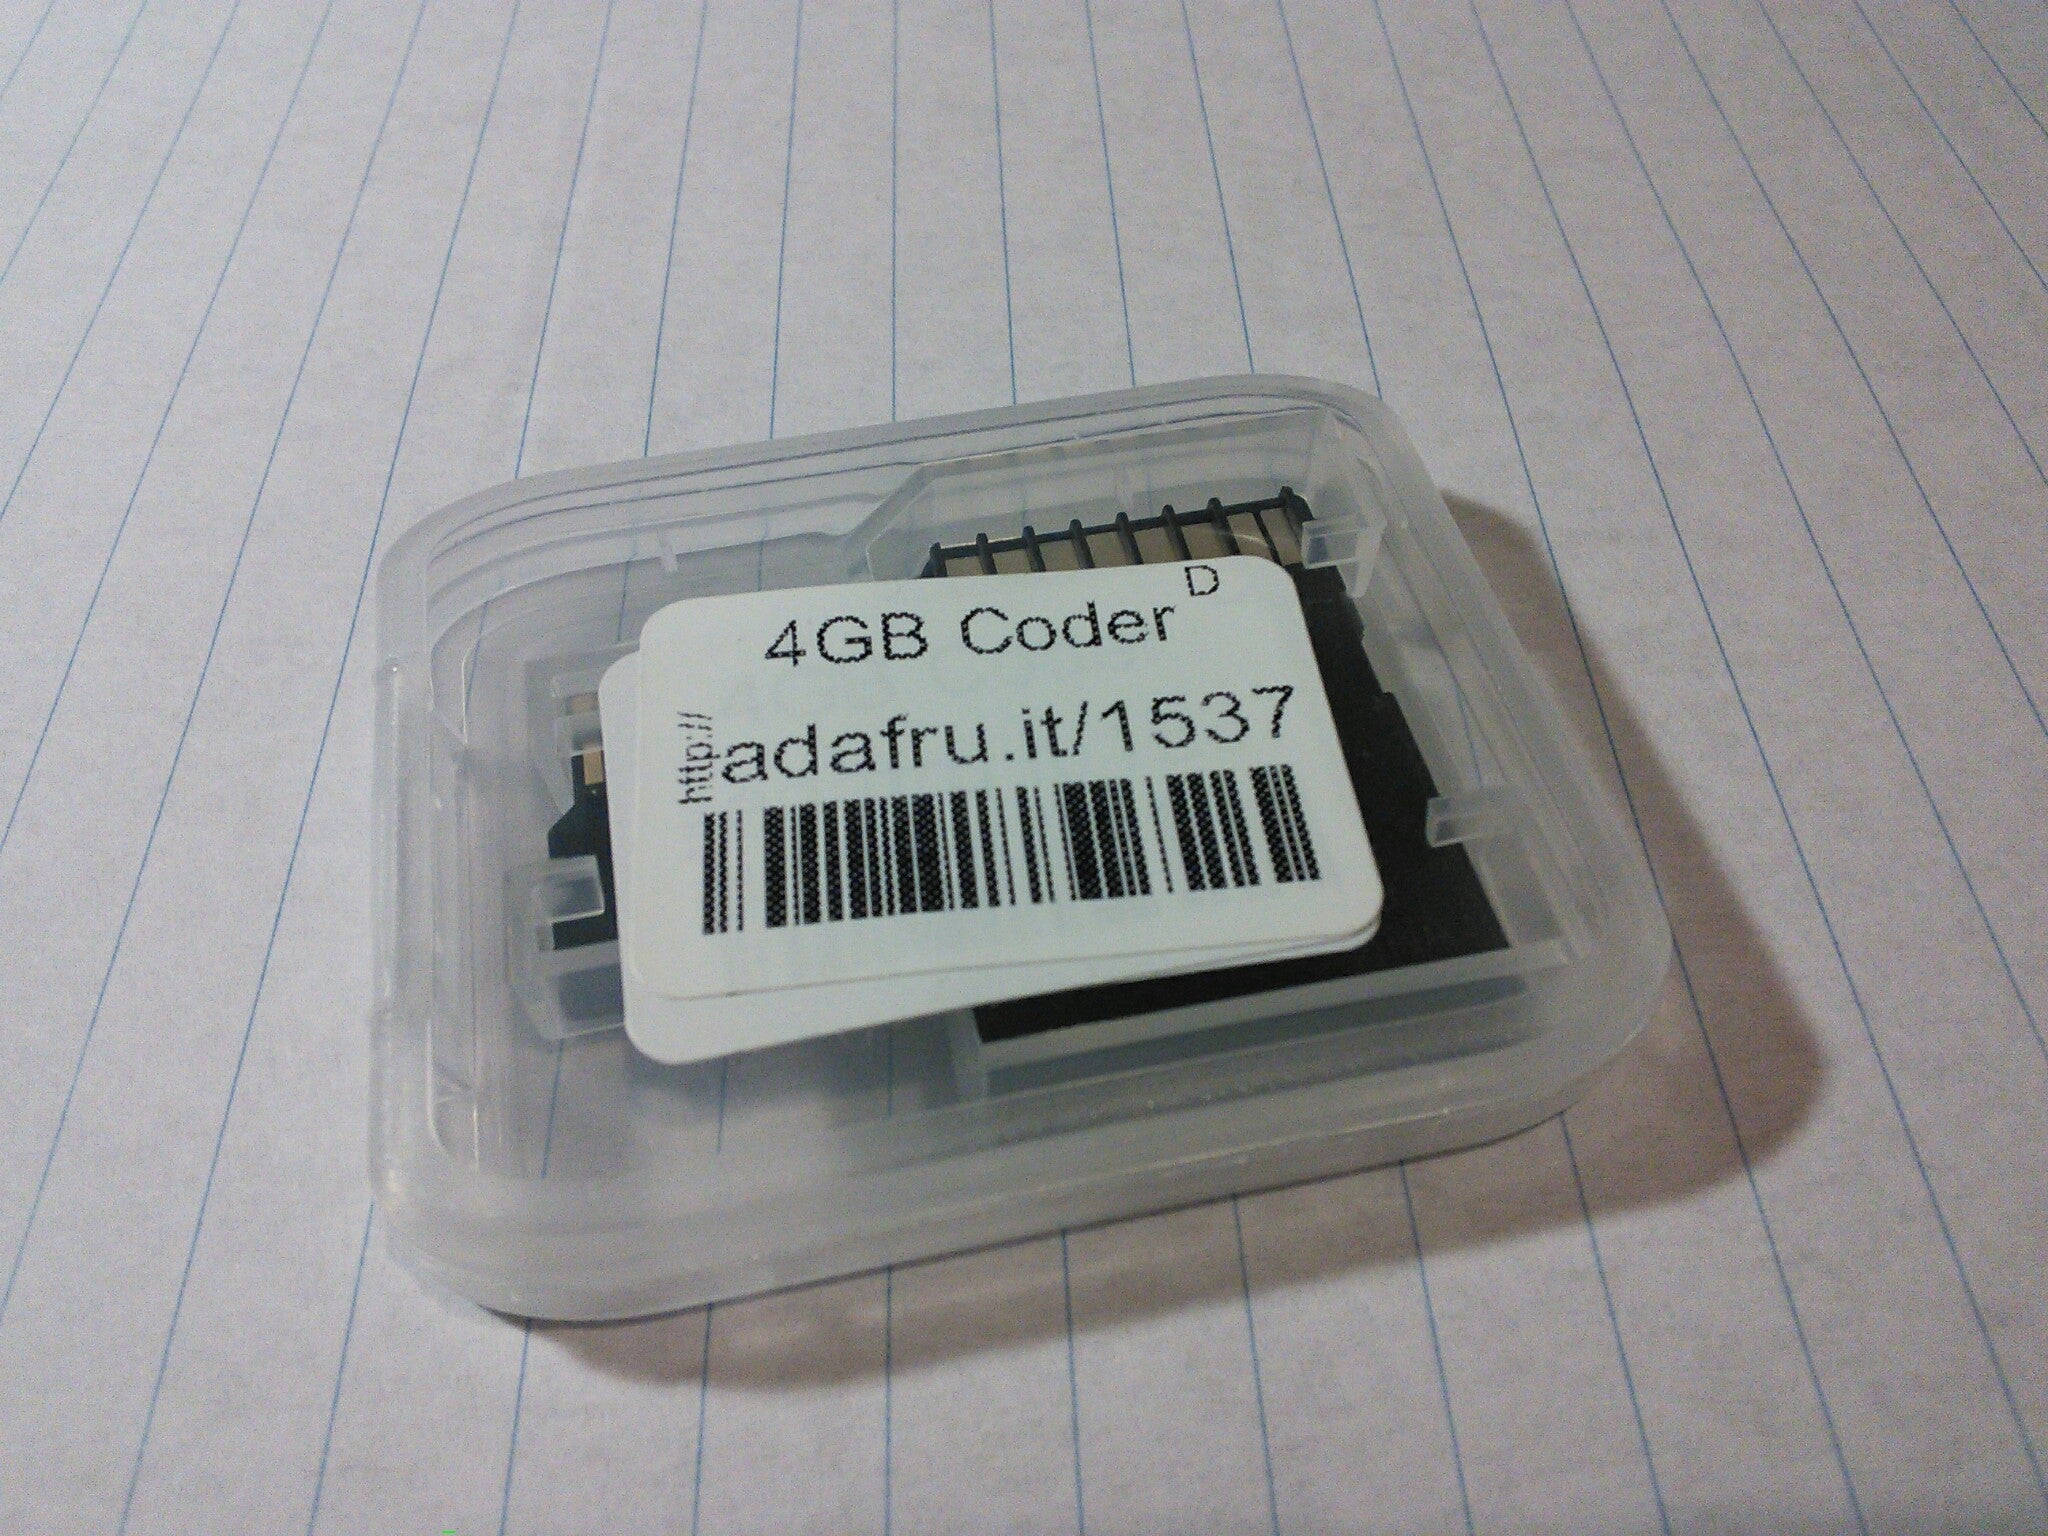 SD Card with Coder from AdaFruit